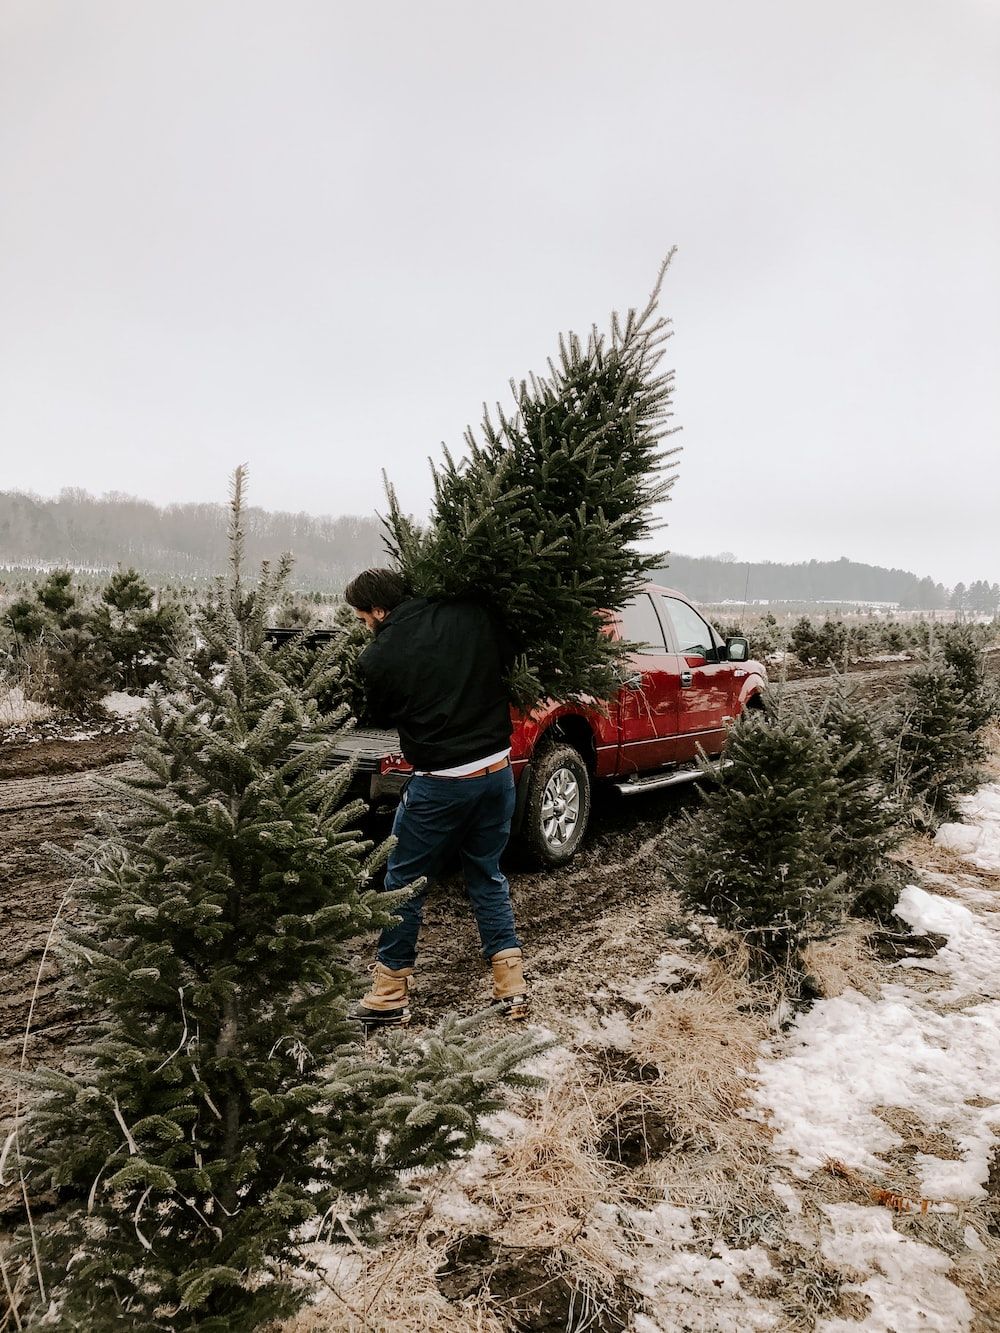 A man carries a Christmas tree to a red truck. - Farm